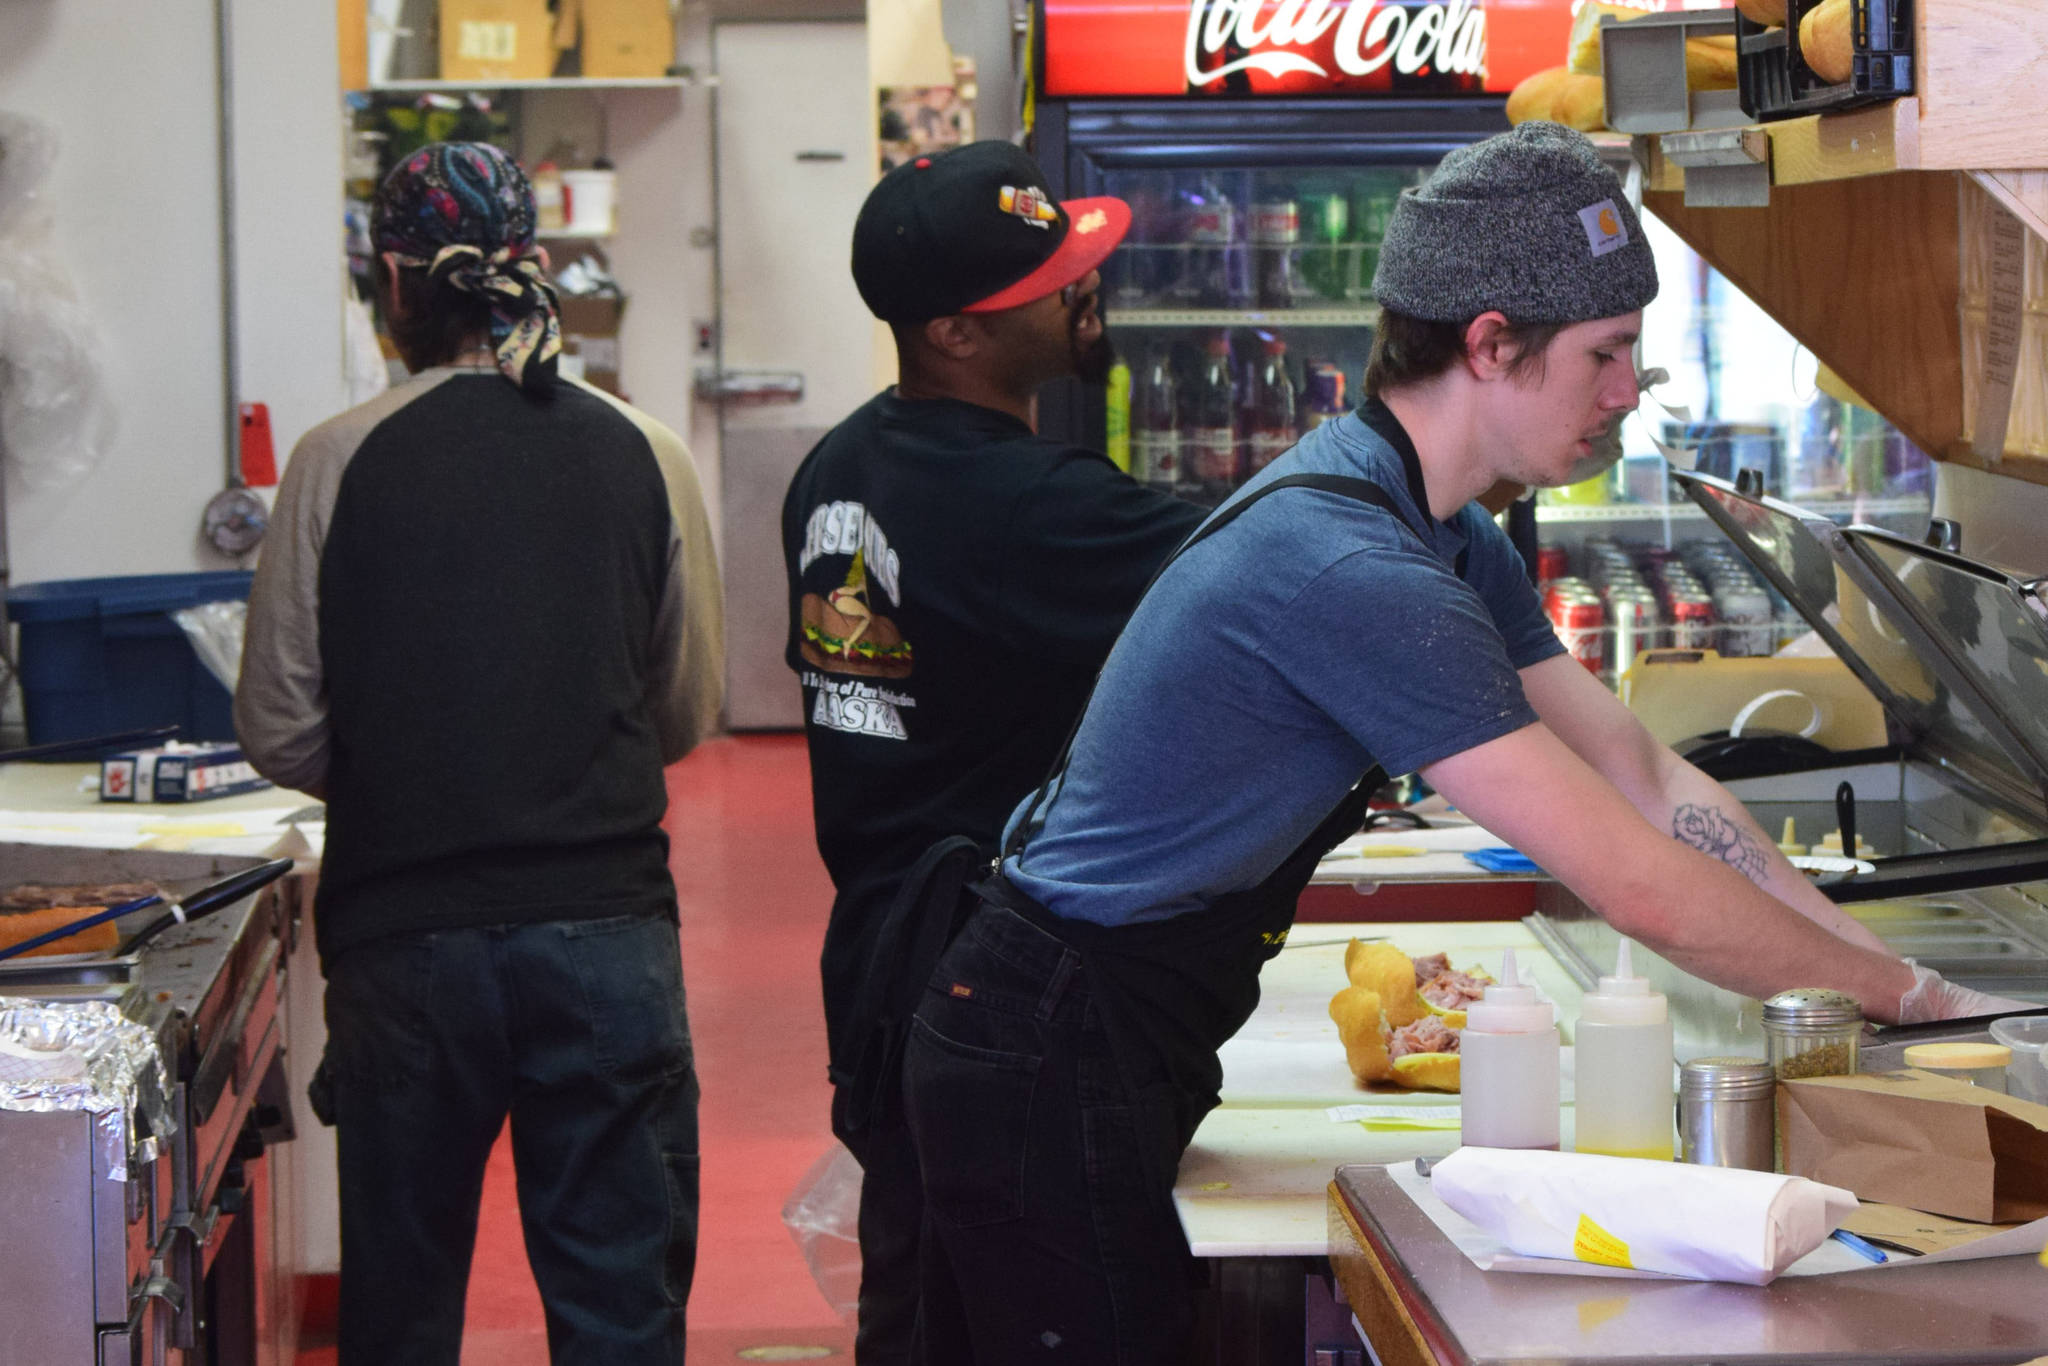 Employees work the lunch rush at Jersey Subs in Kenai, Alaska on Thursday, May 13, 2021. The sandwich shop is having trouble finding people to work this summer. (Camille Botello / Peninsula Clarion)